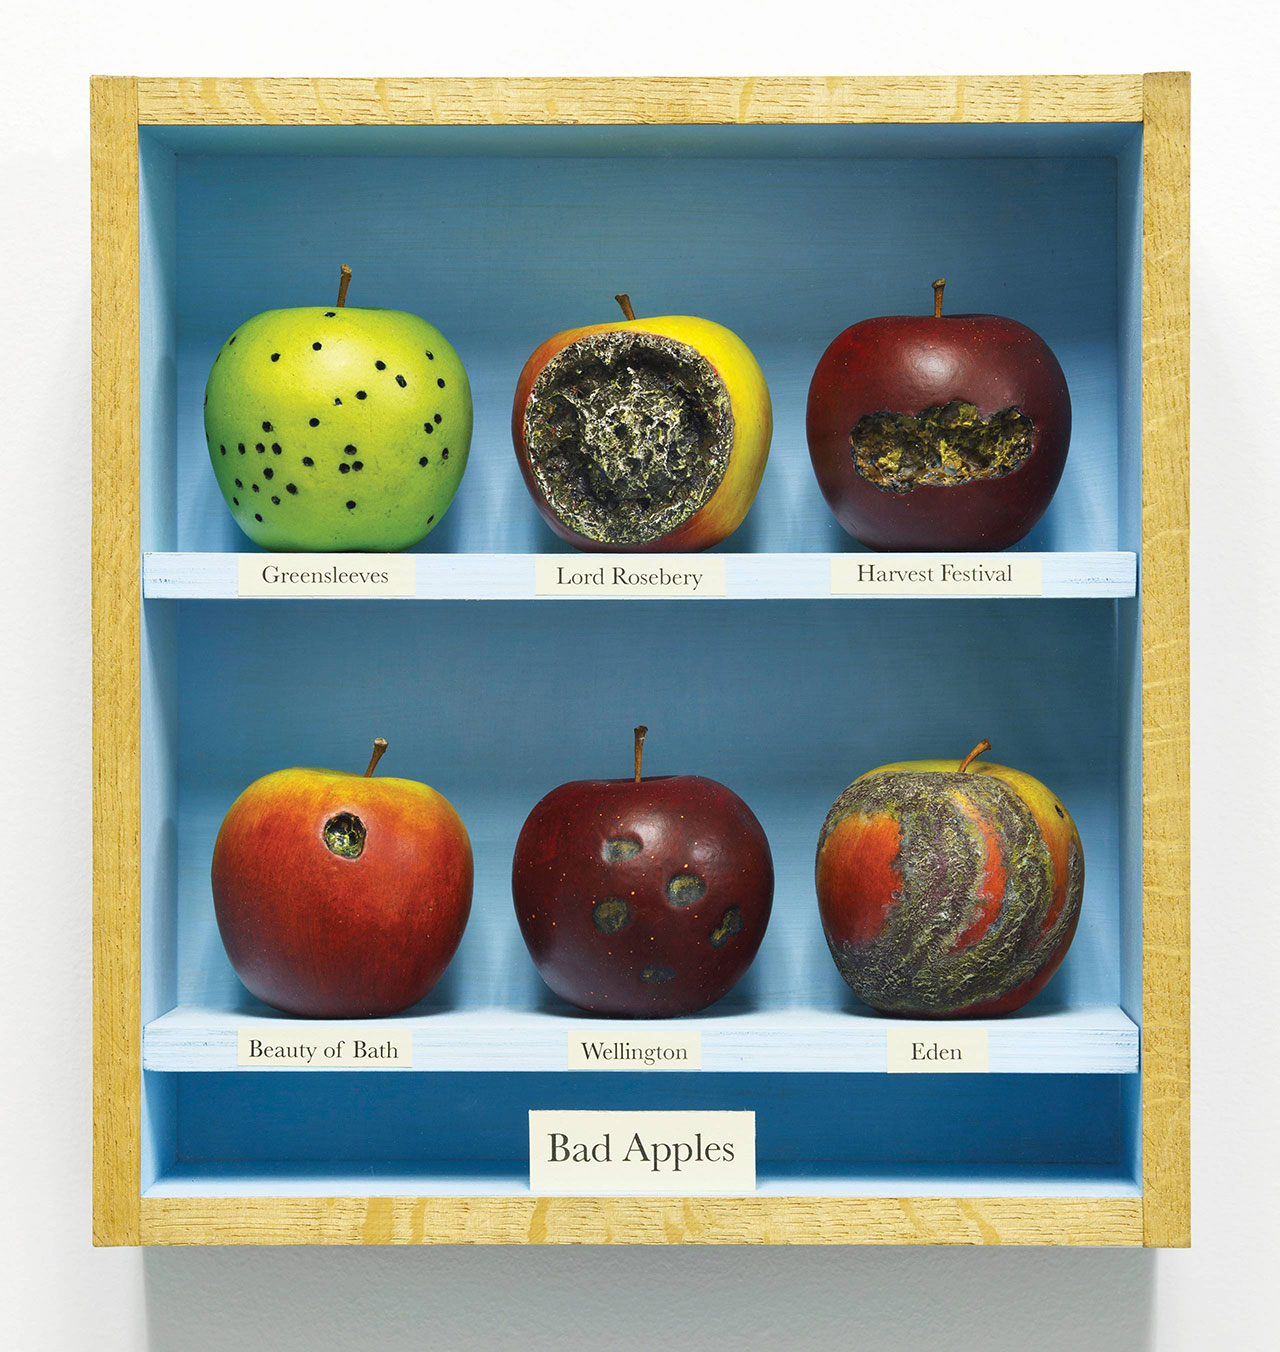 BAD APPLES by John Dilnot 2010, 30 × 28 × 10 cm Acrylic, wood, glass, paper. Courtesy of Tom Buchanan and 8 Books.